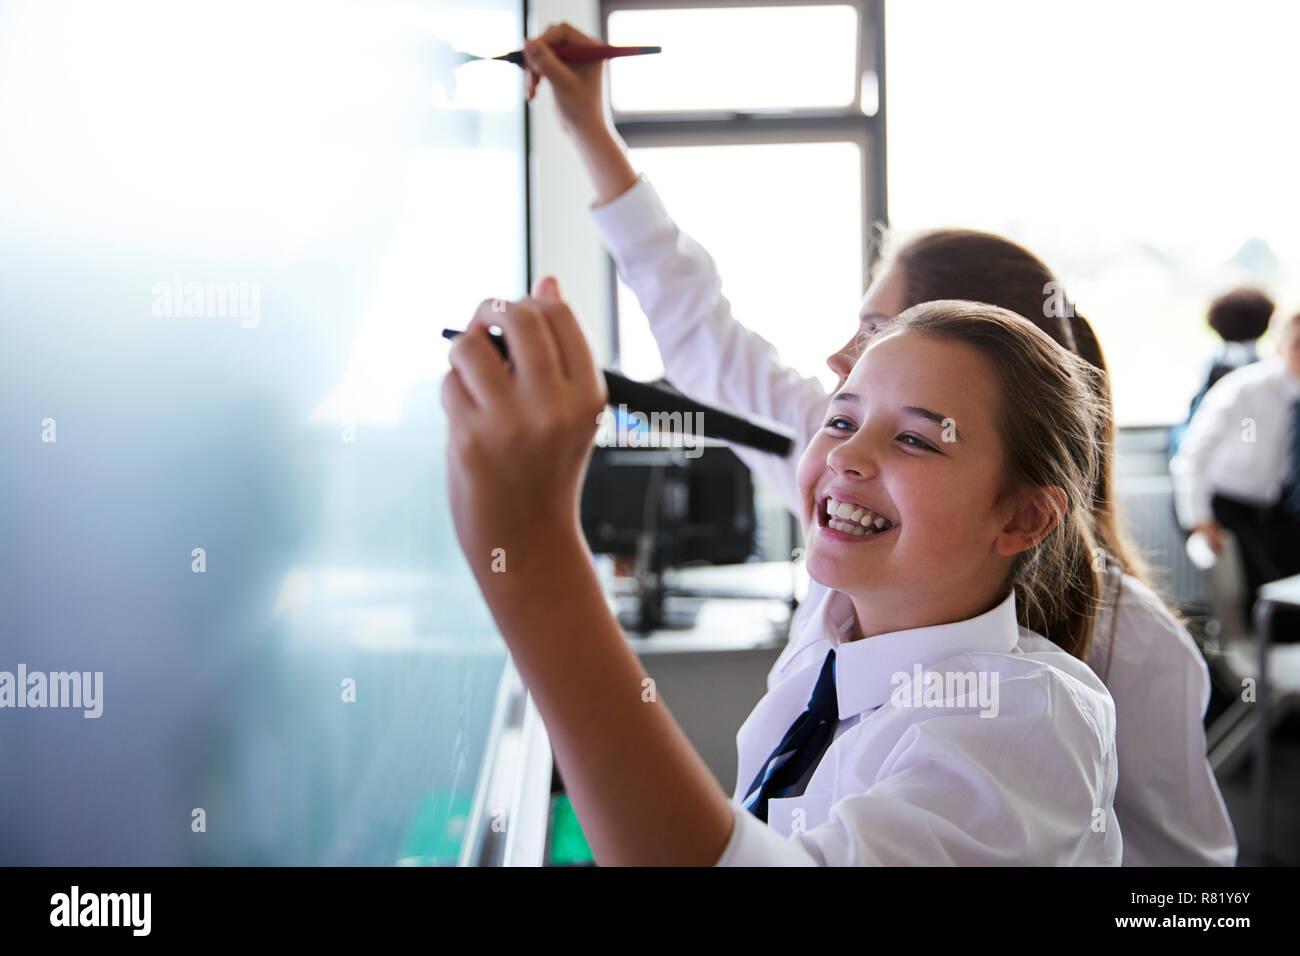 Female High School Students Wearing Uniform Using Interactive Whiteboard During Lesson Stock Photo